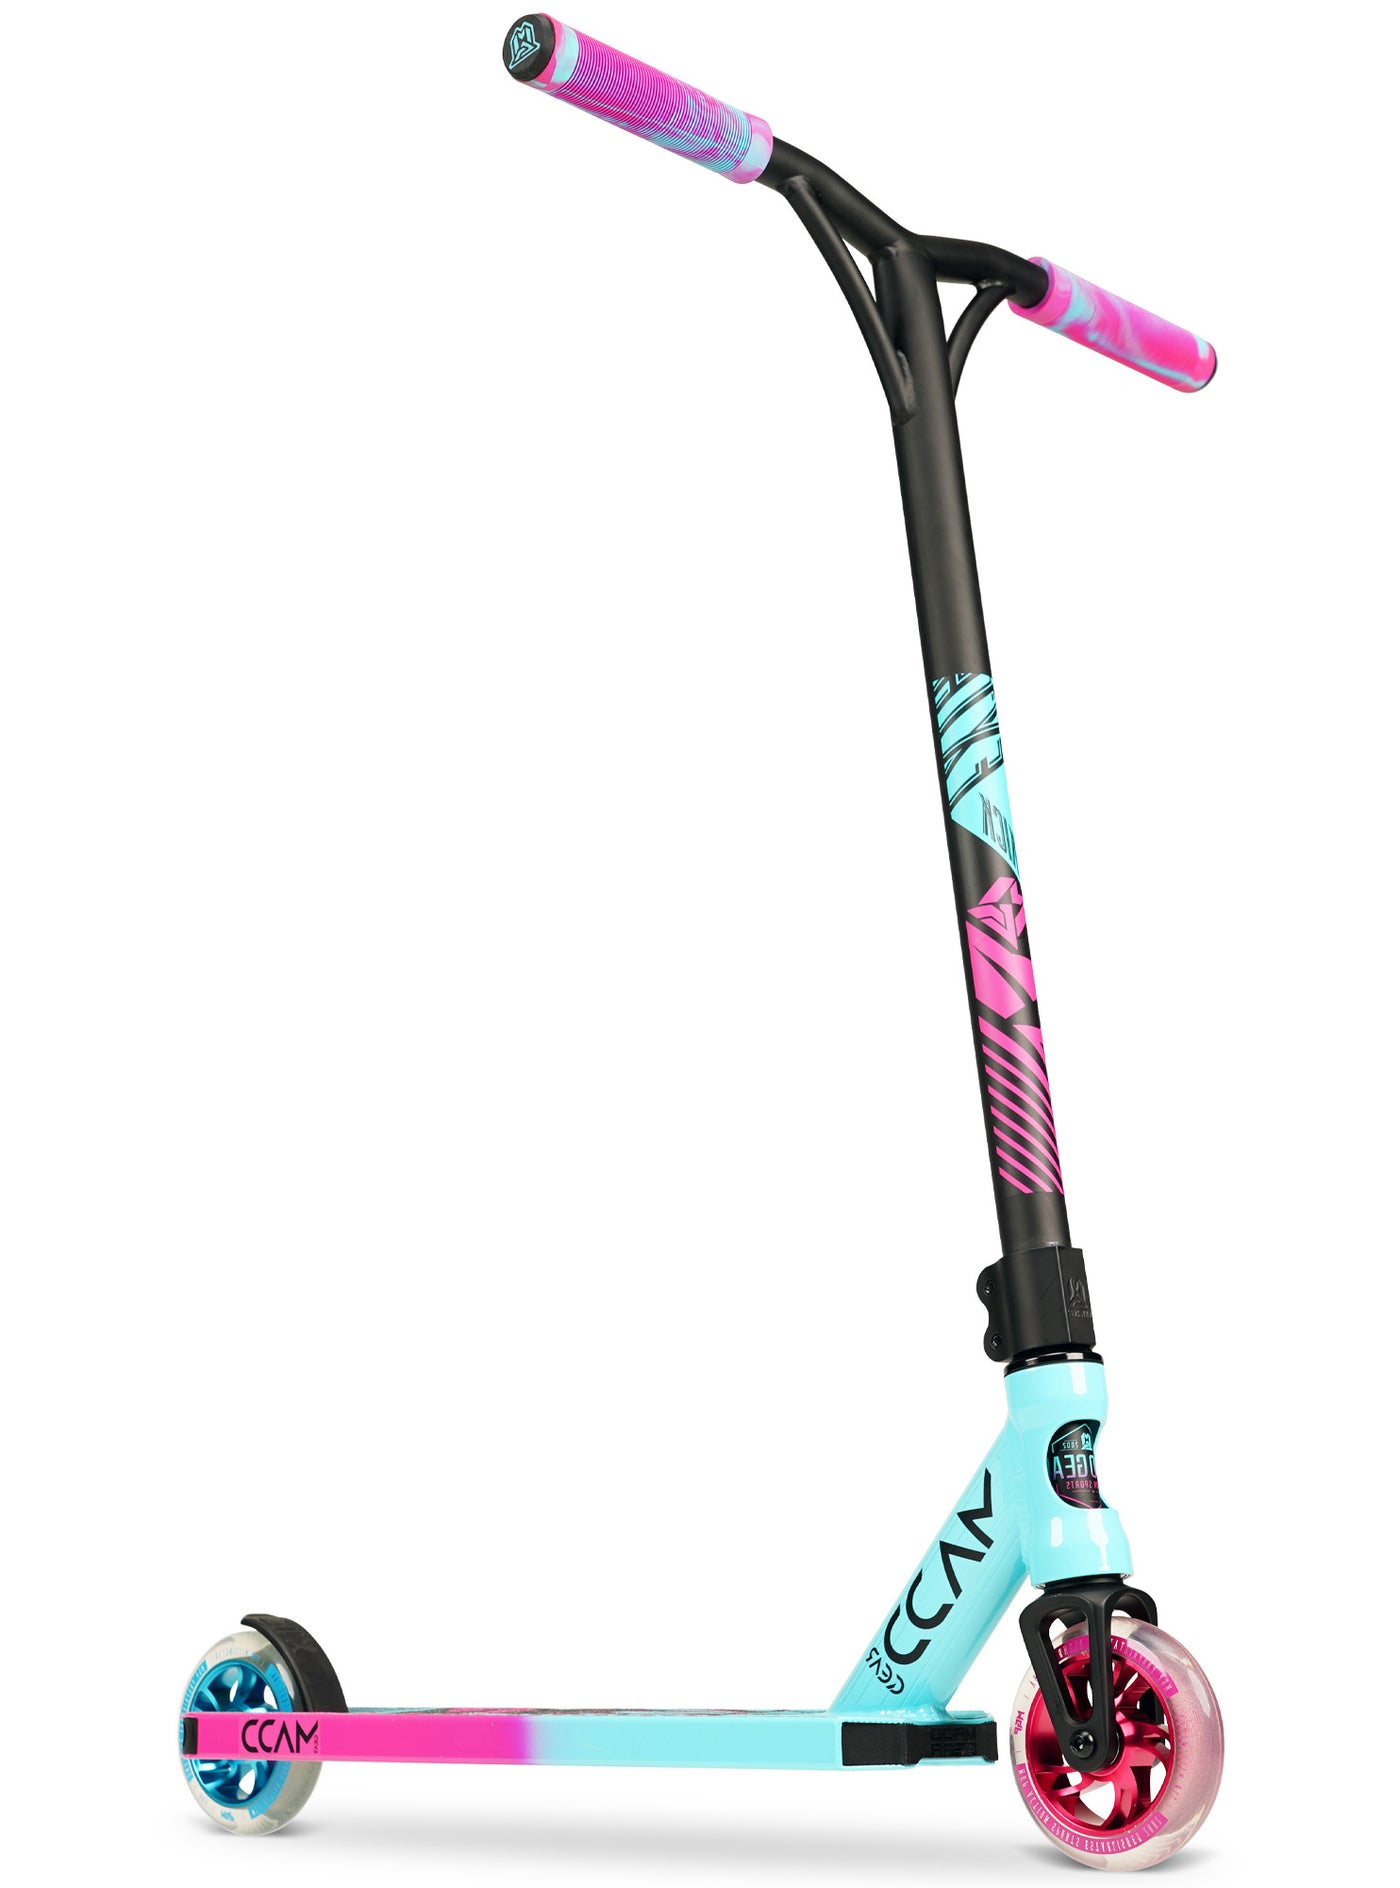 Madd Gear MGP Kick Extreme Stunt Scooter Complete High Quality Razor Pro Trick Skate Park Mad Teal Pink